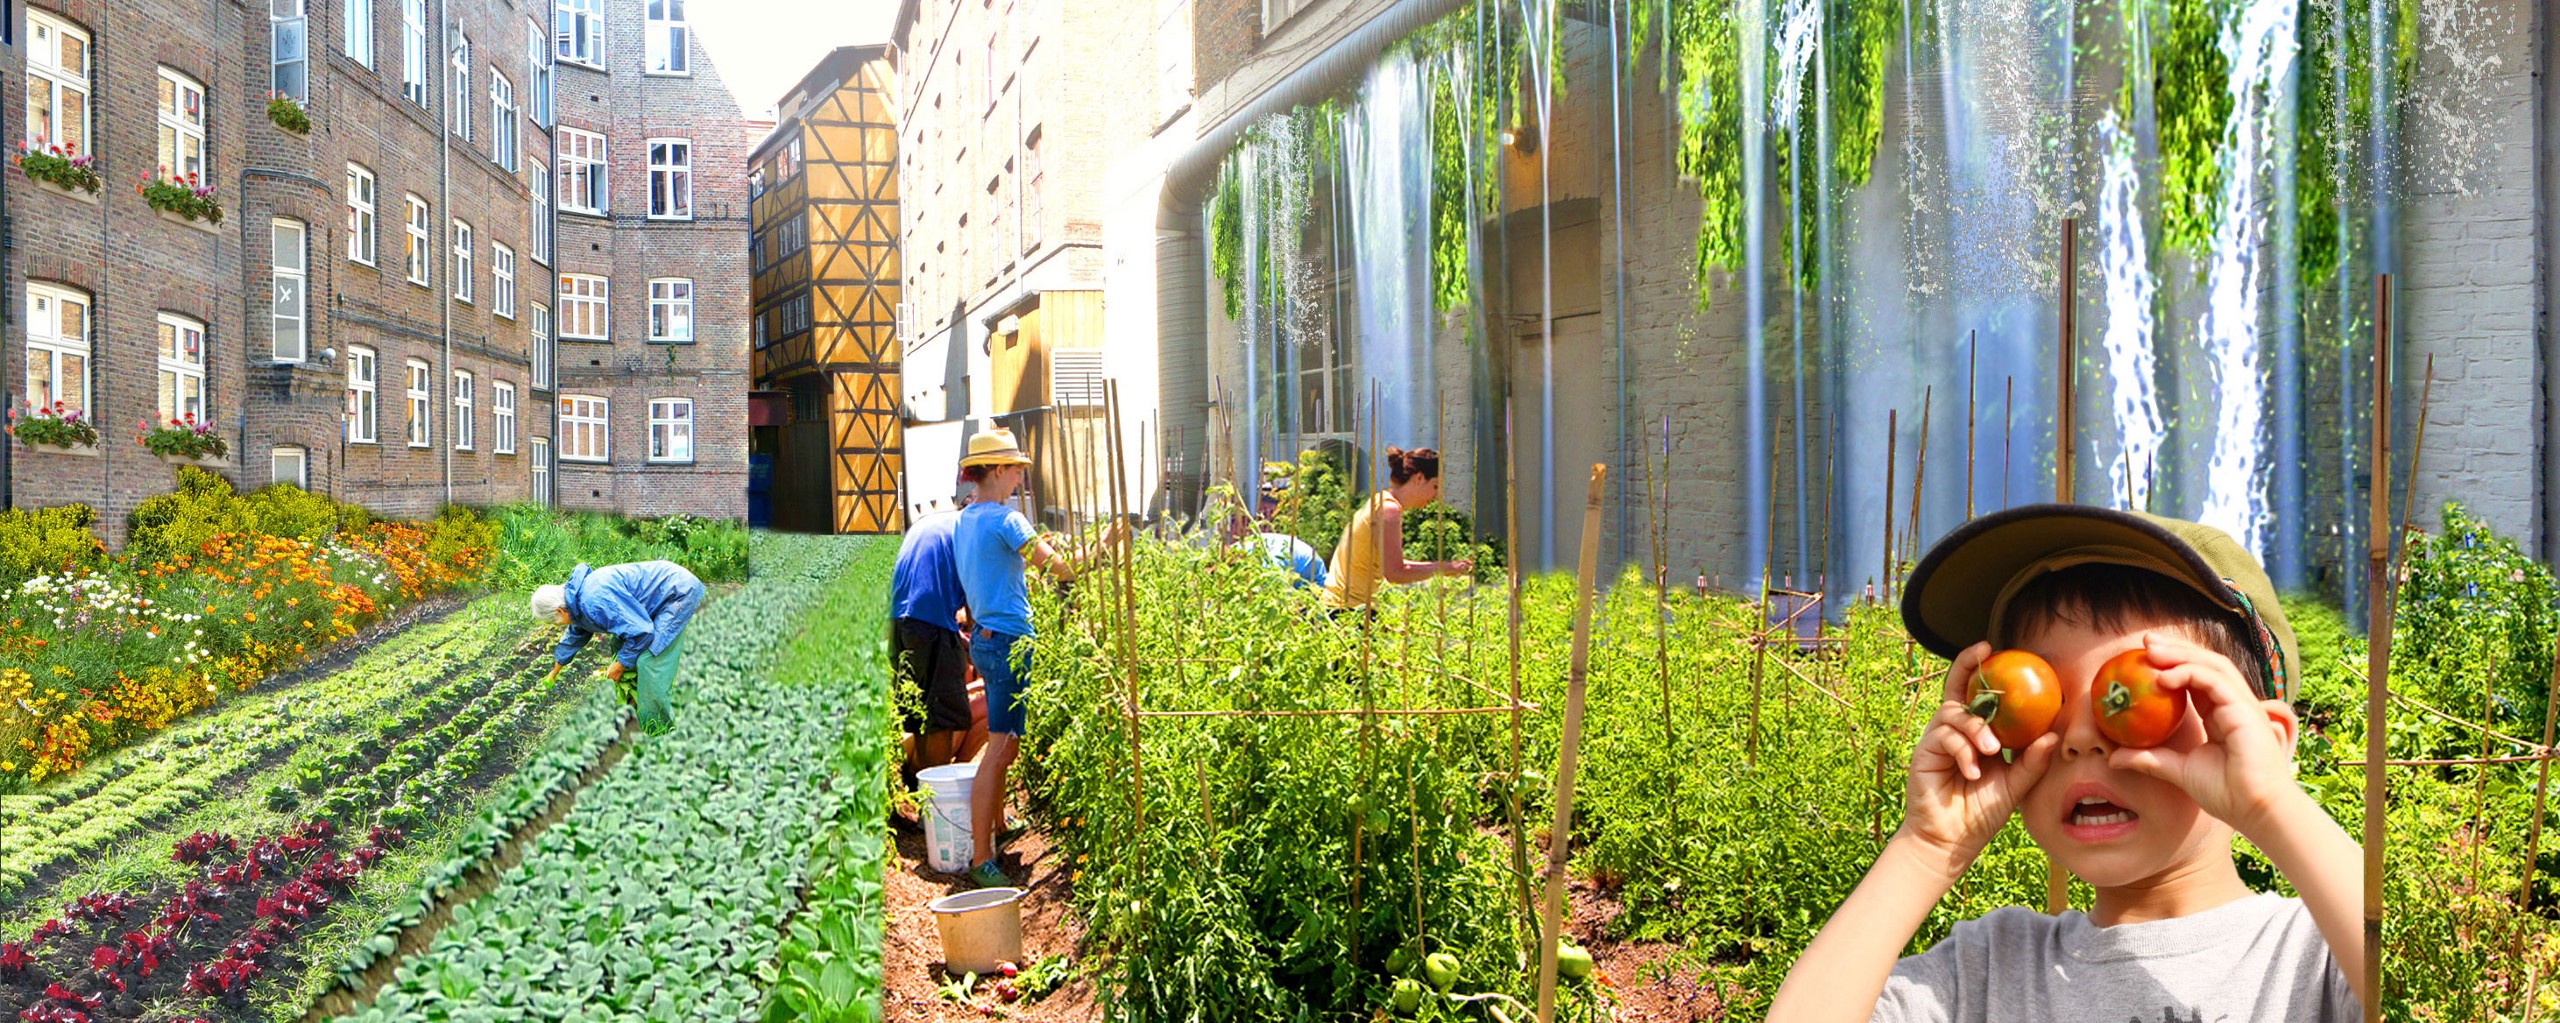 A mock-up of people farming tomatoes in a community garden between city buildings.